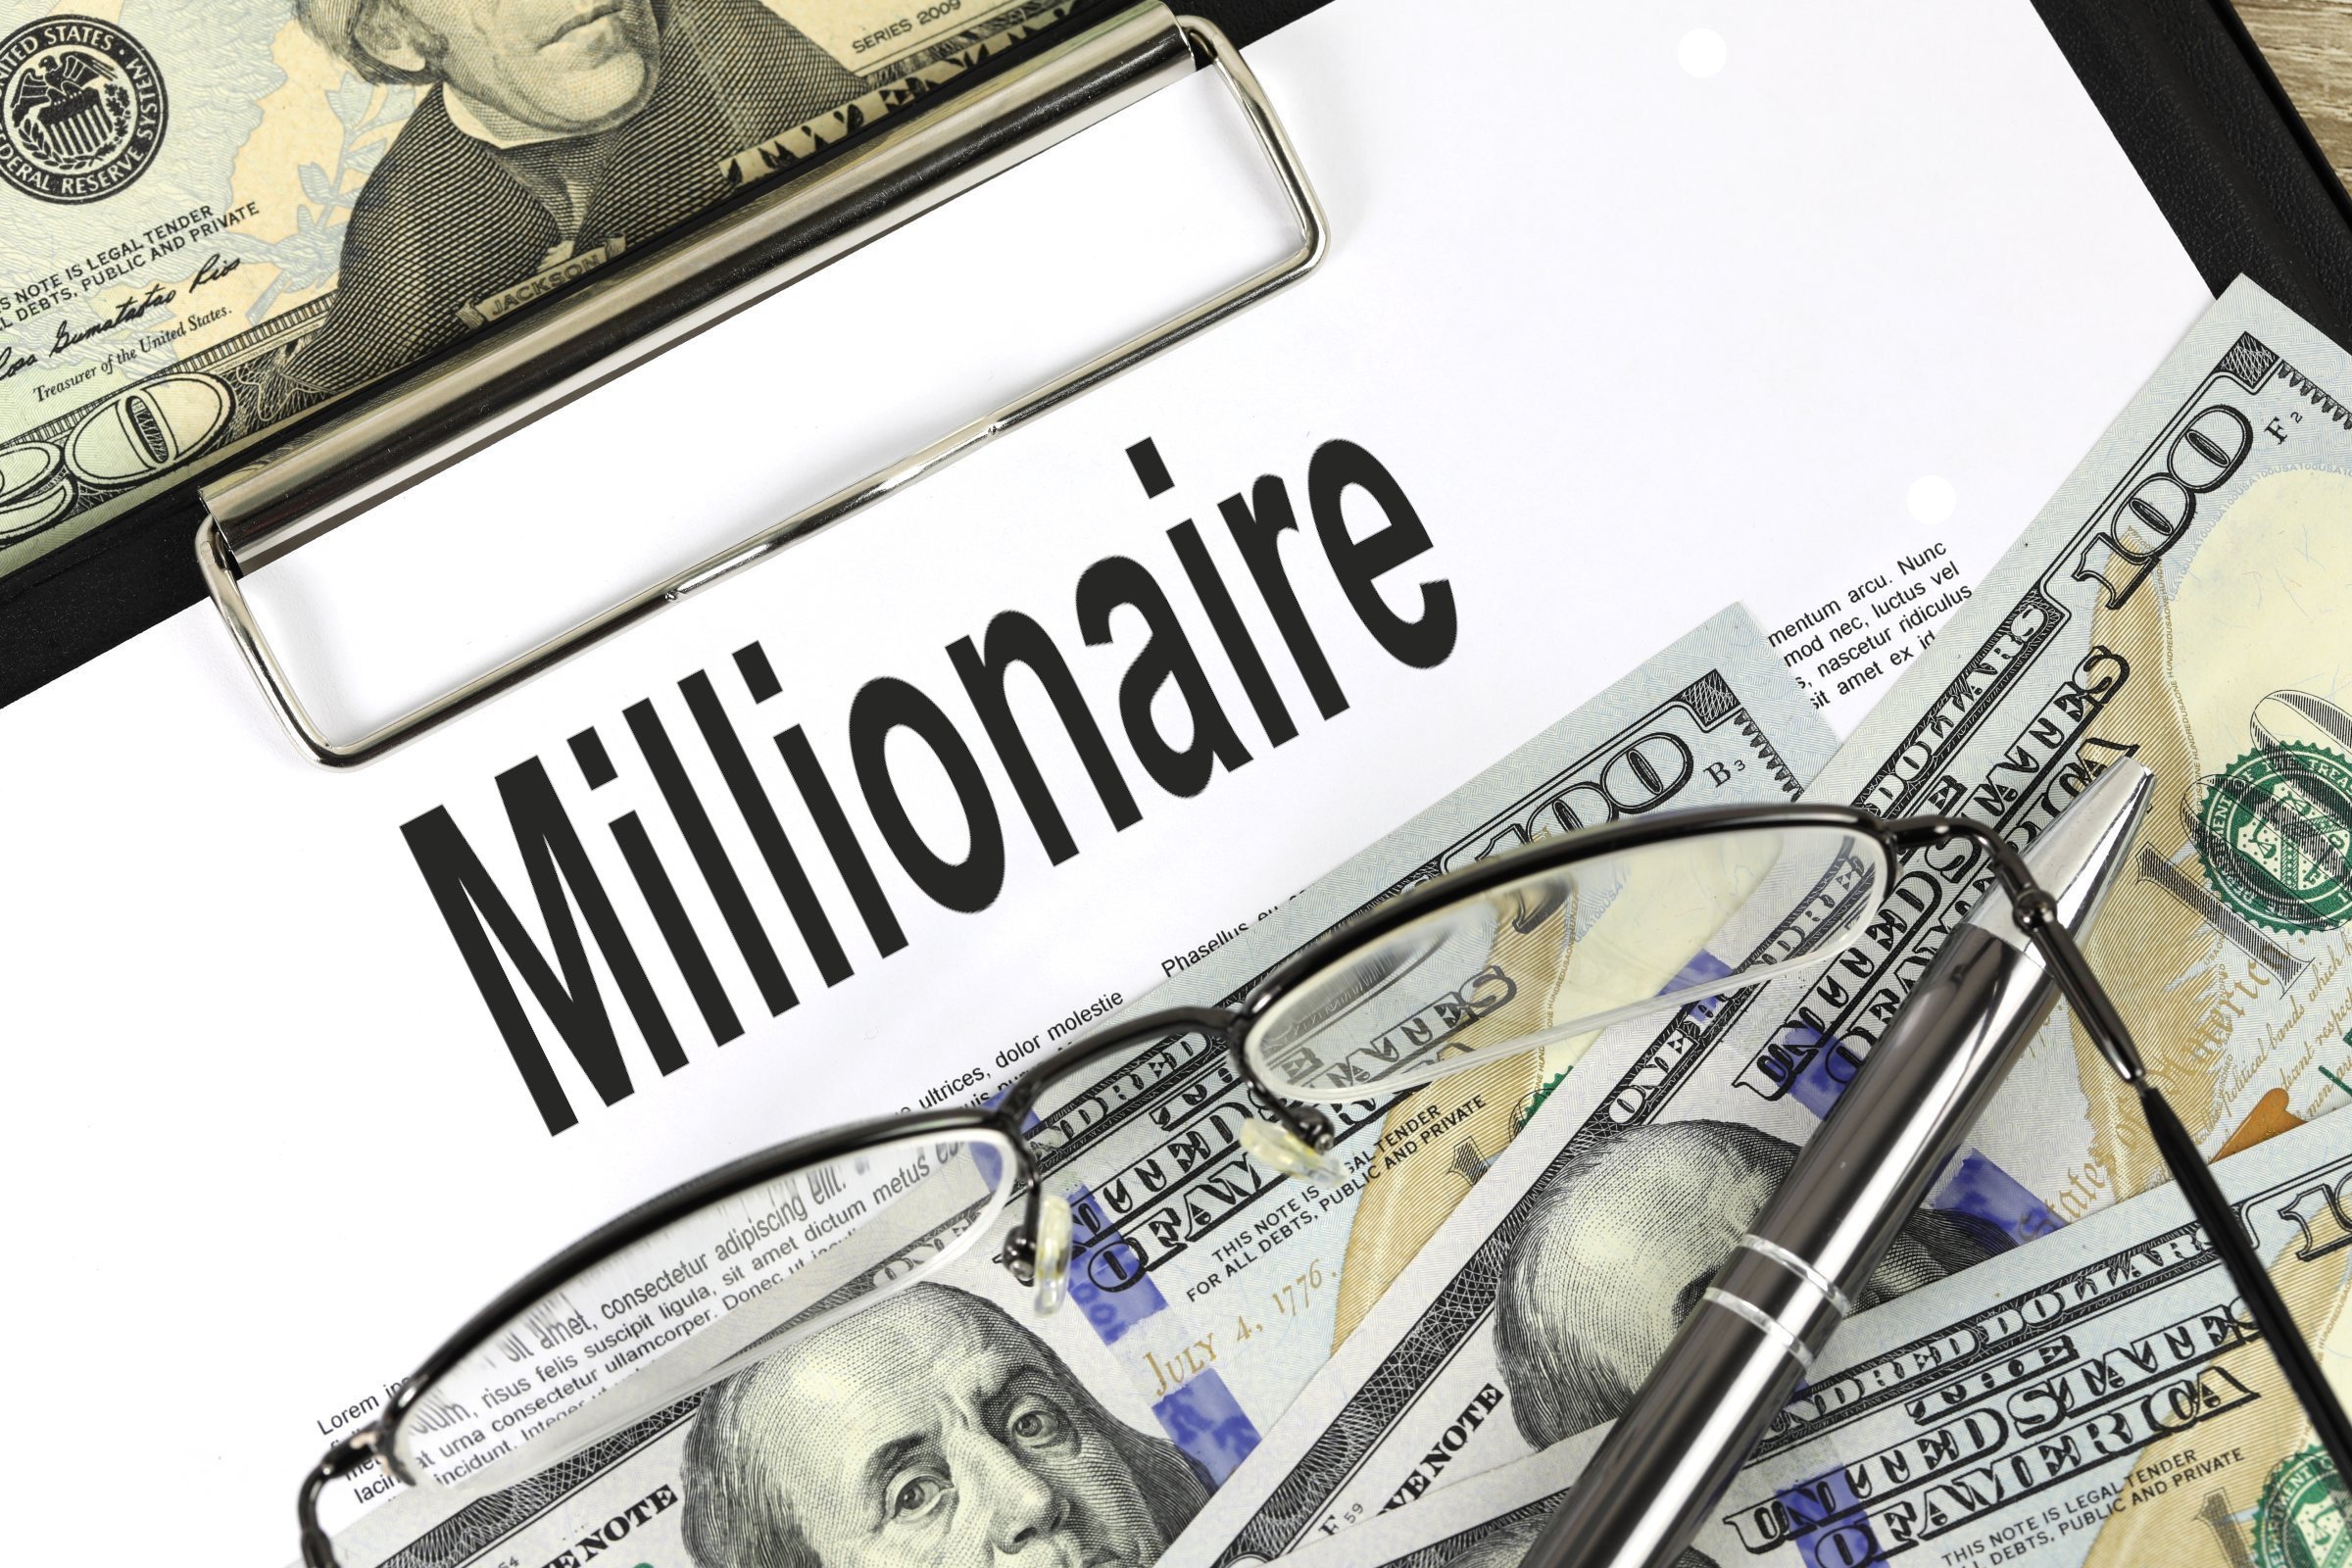 How to develop a millionaire mindset with example? 5 tips to develop a millionaire mindset